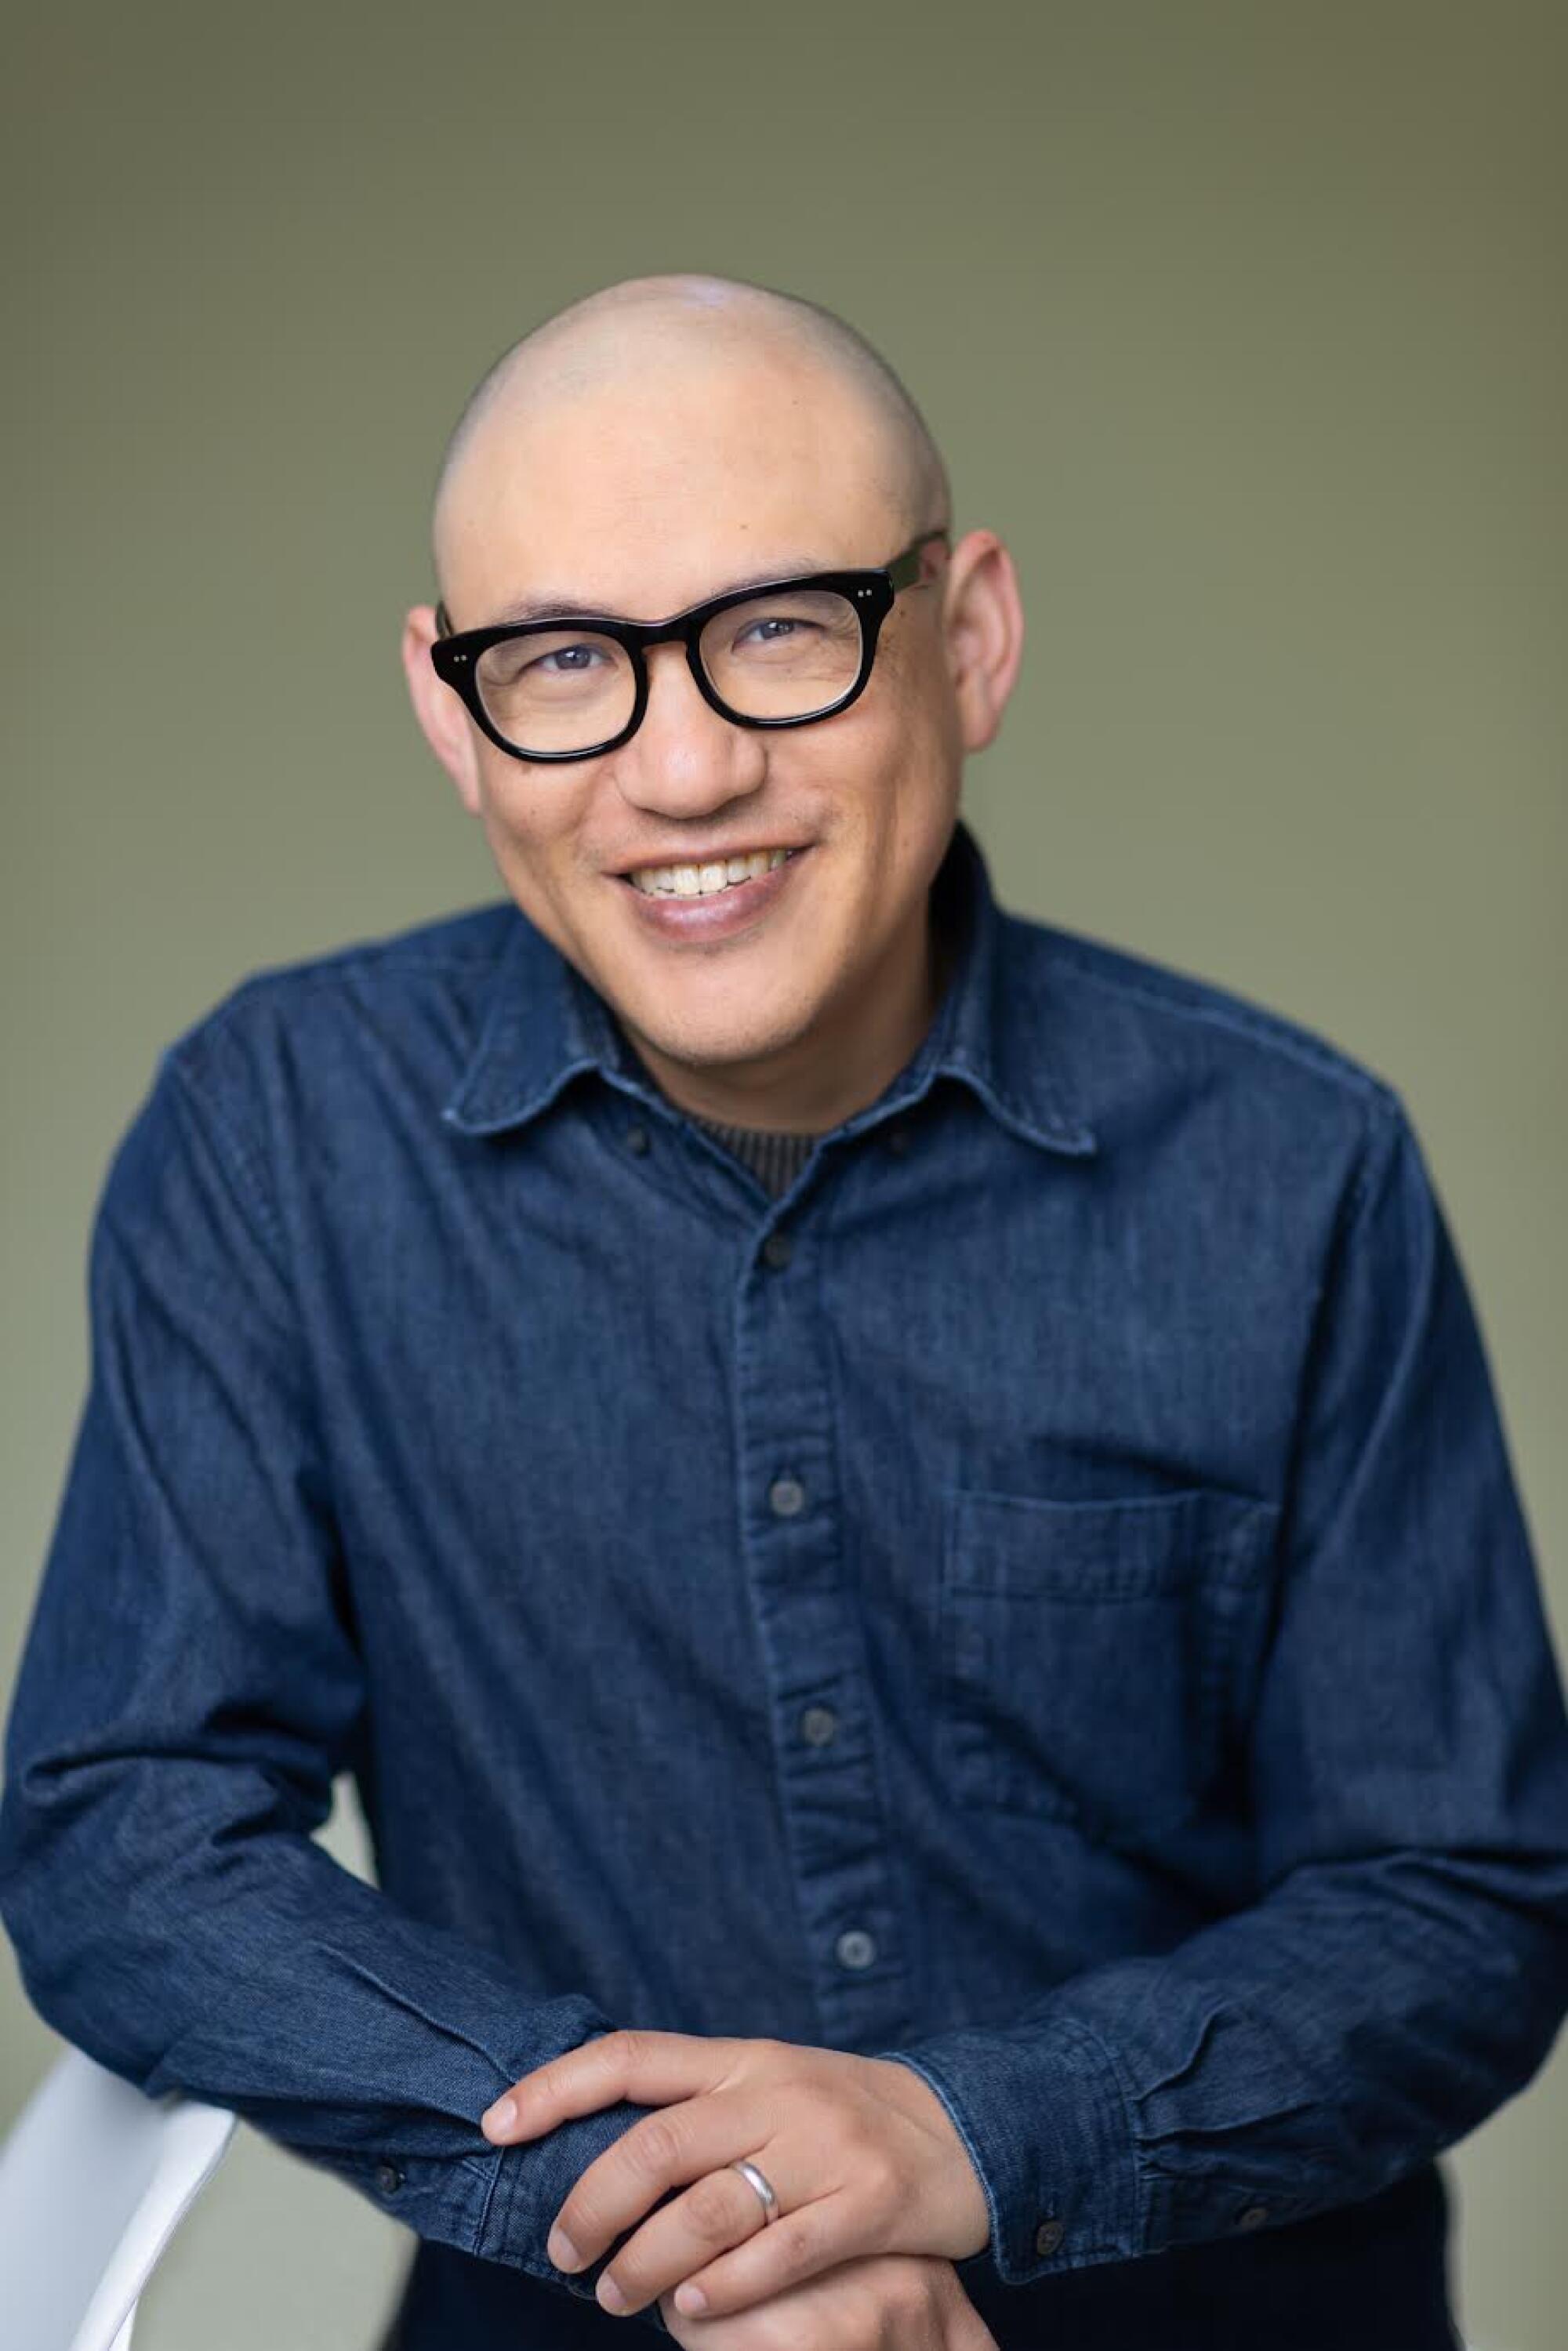 A headshot of stand-up comedian George Chen